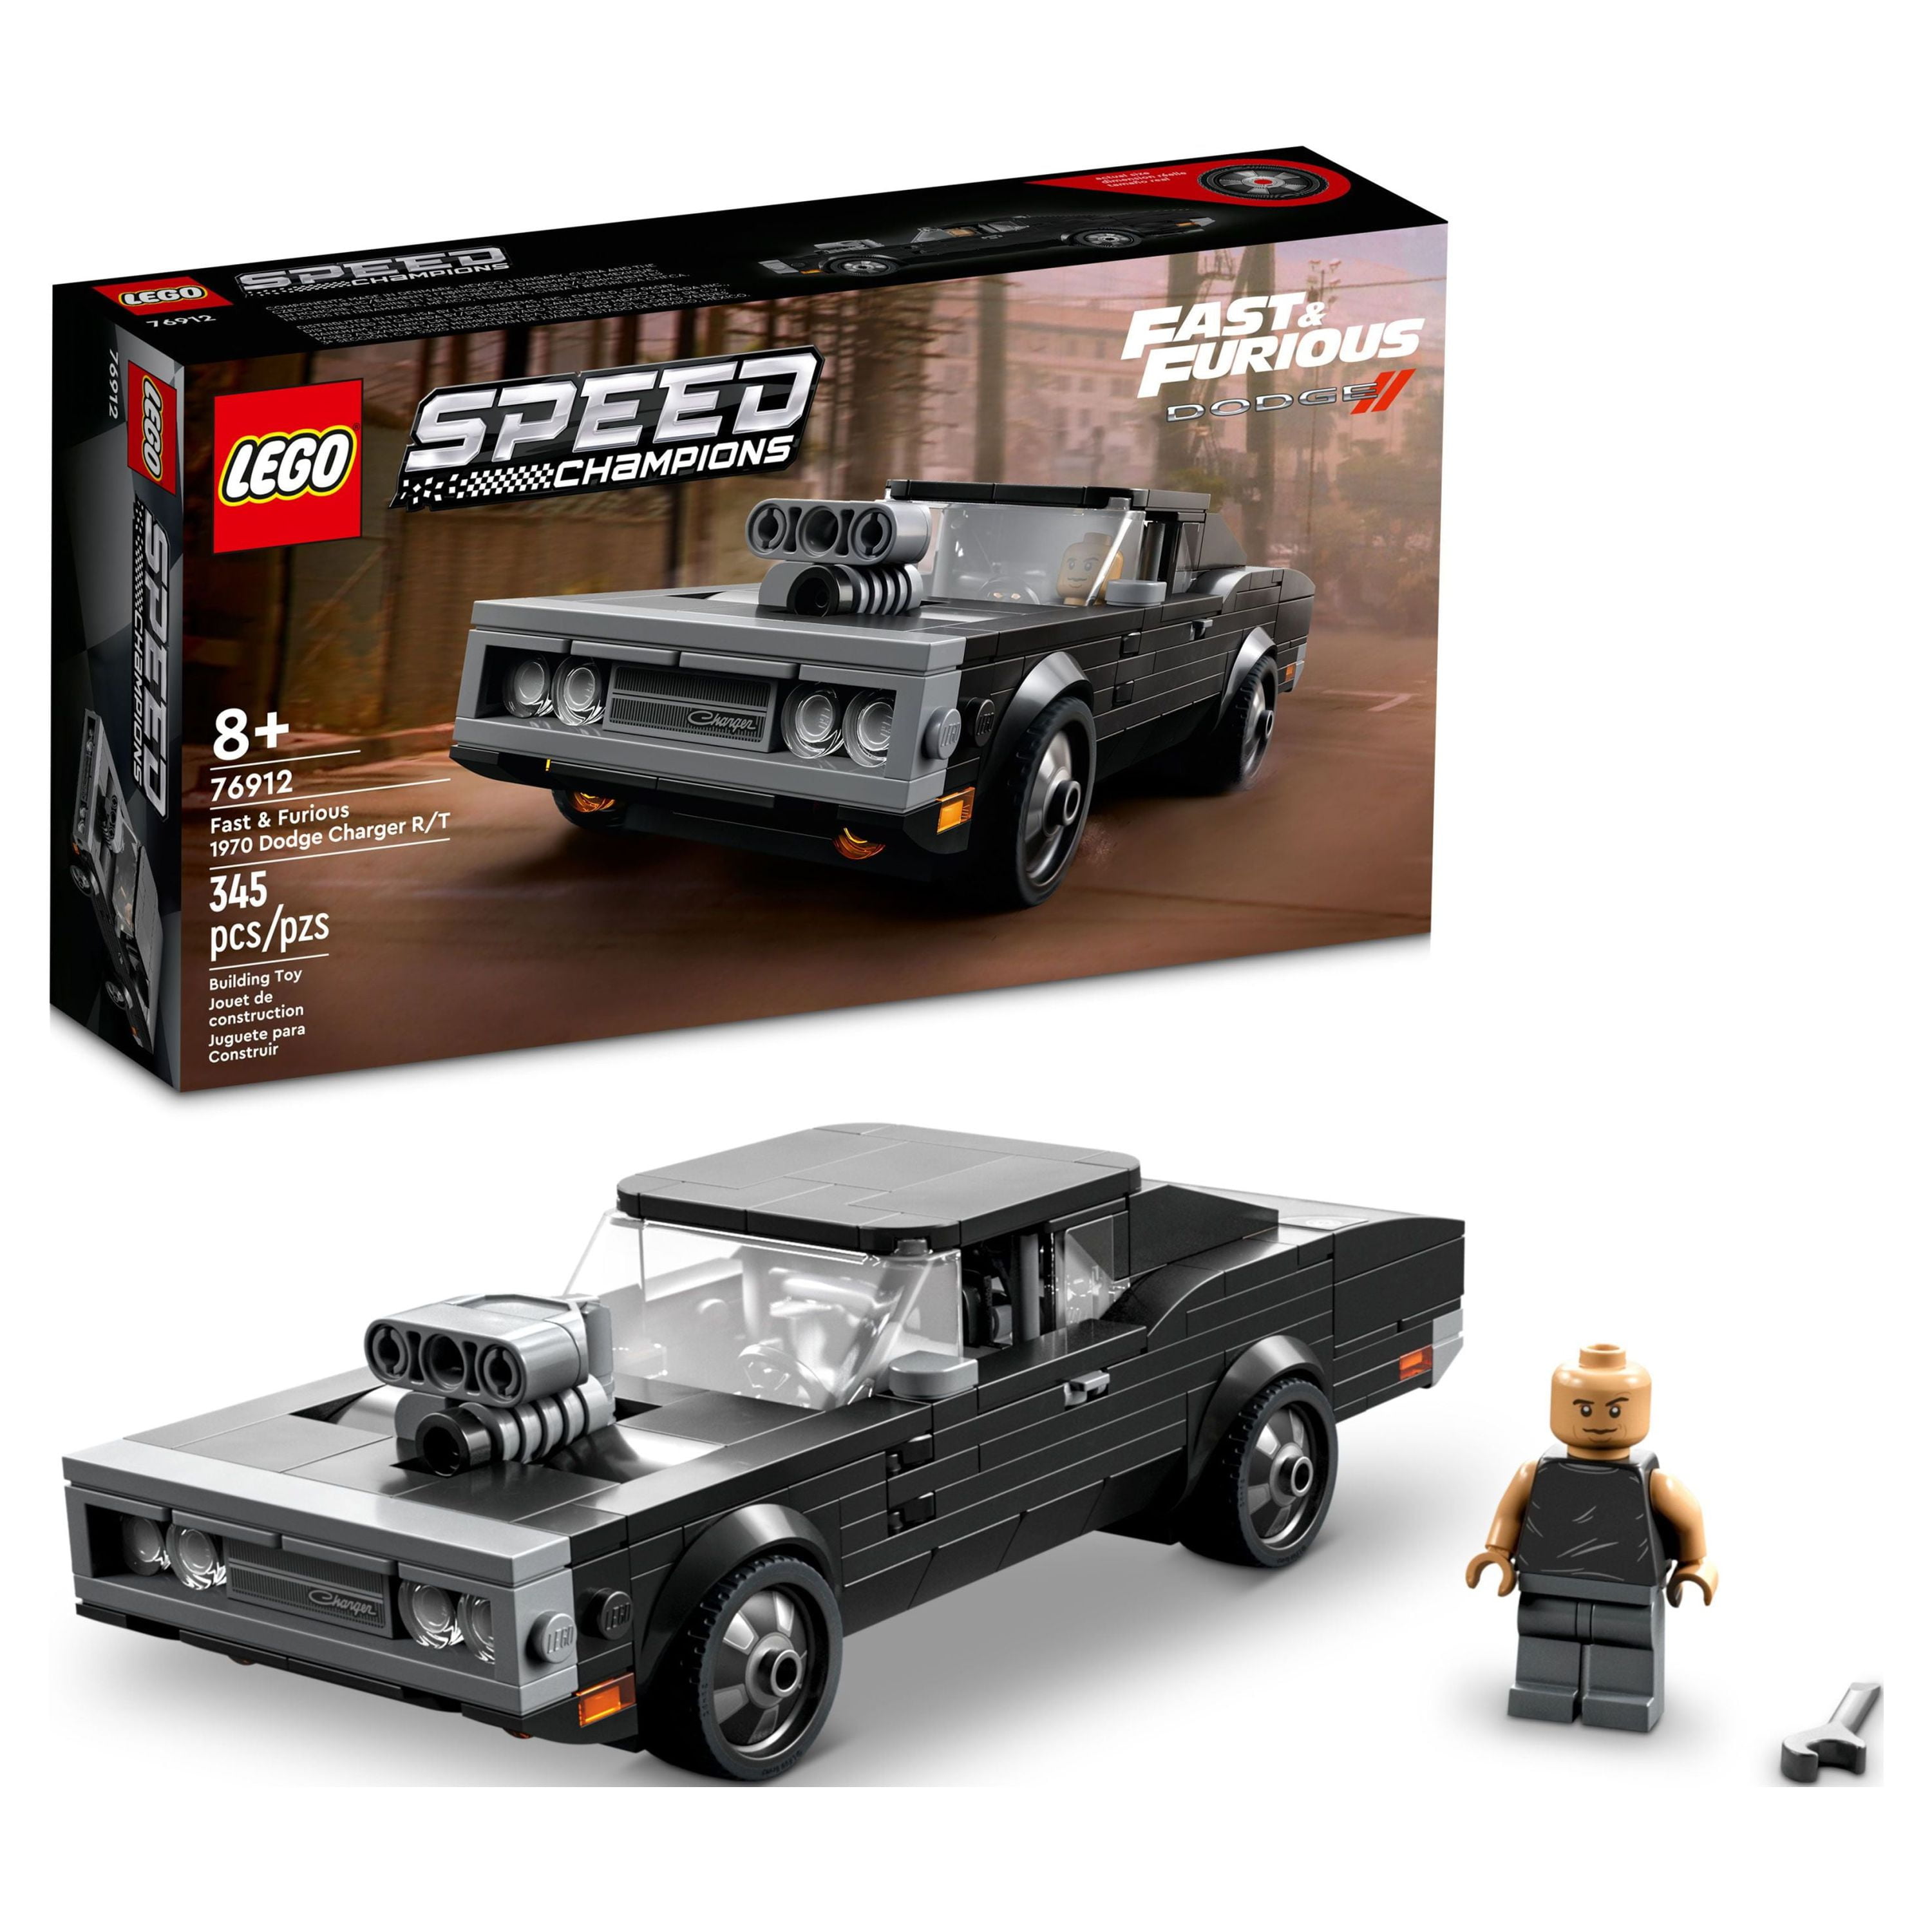 Lego Speed Champions (76912) Fast & Furious 1970 Dodge Charger R/T